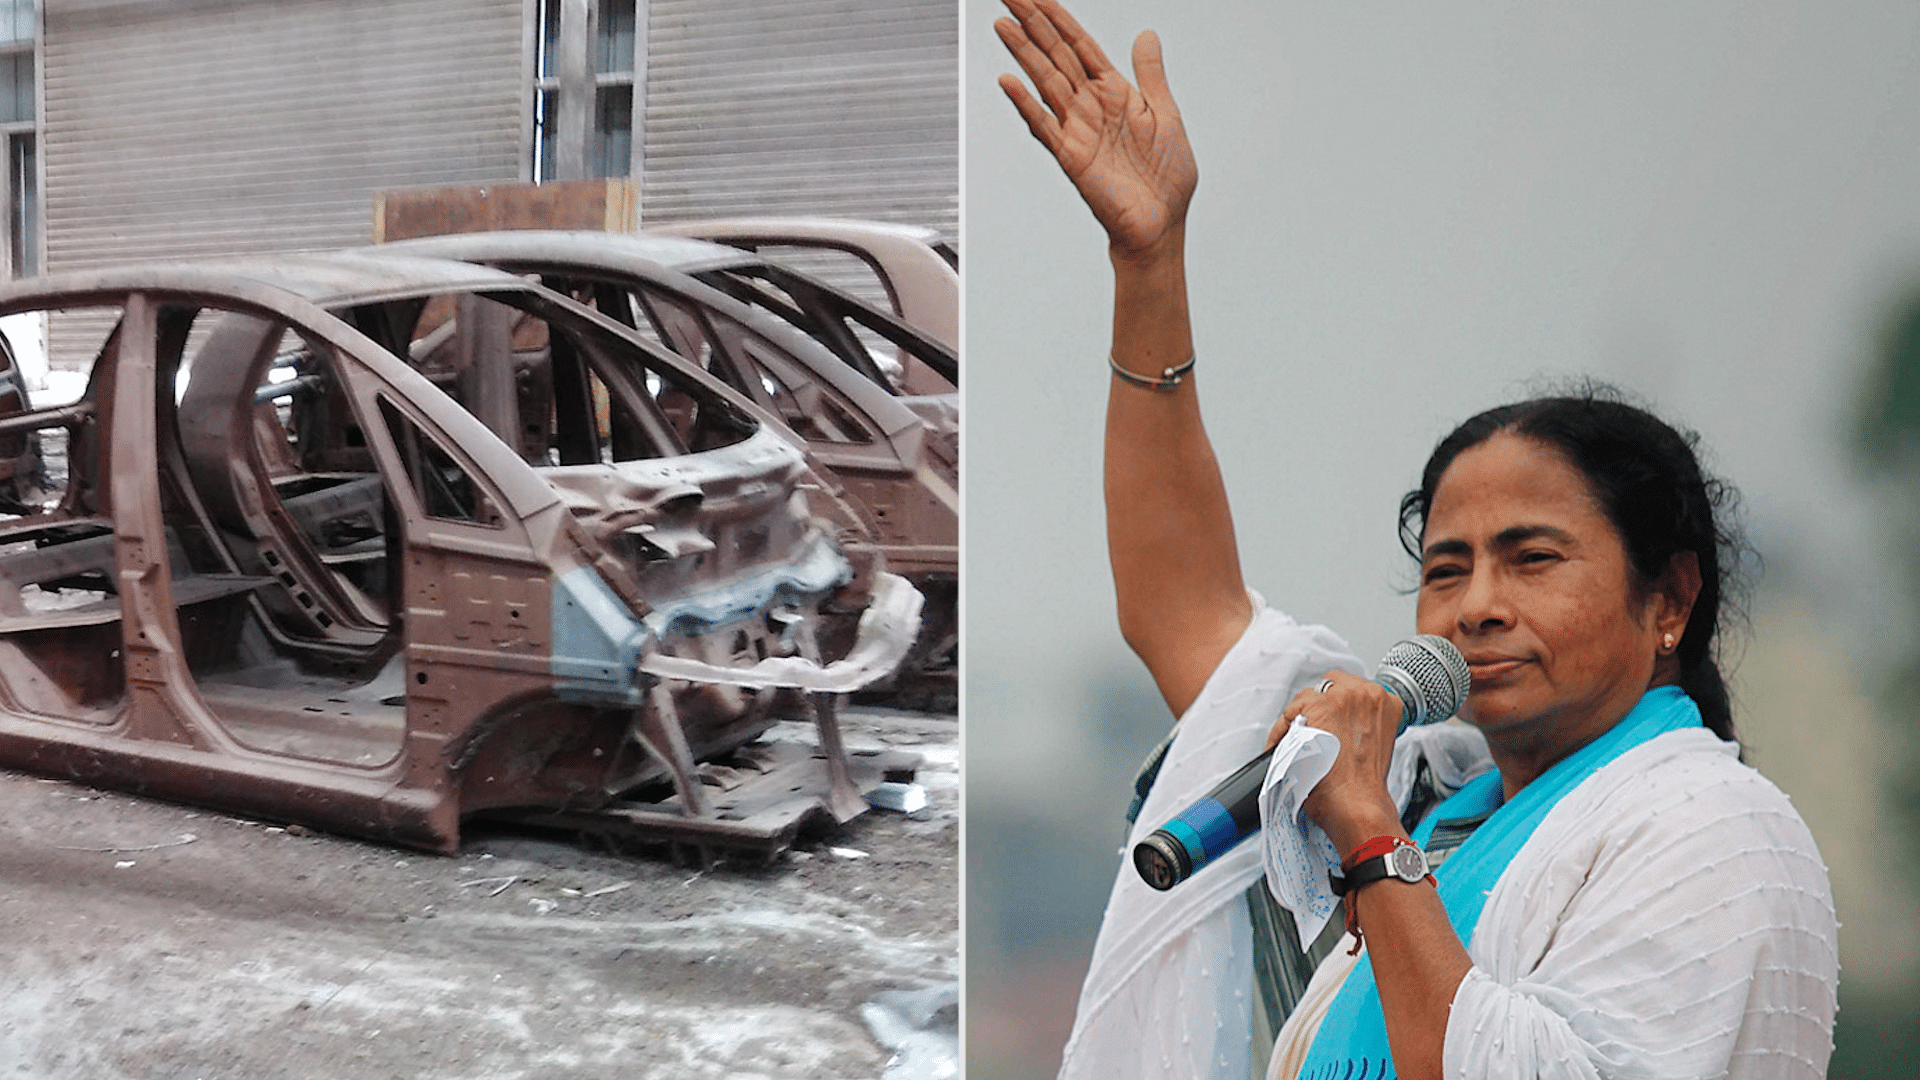 Tata Motors suffer a setback after Supreme Court verdict, Mamata Banerjee expresses joy. (Photo: Altered by The Quint)